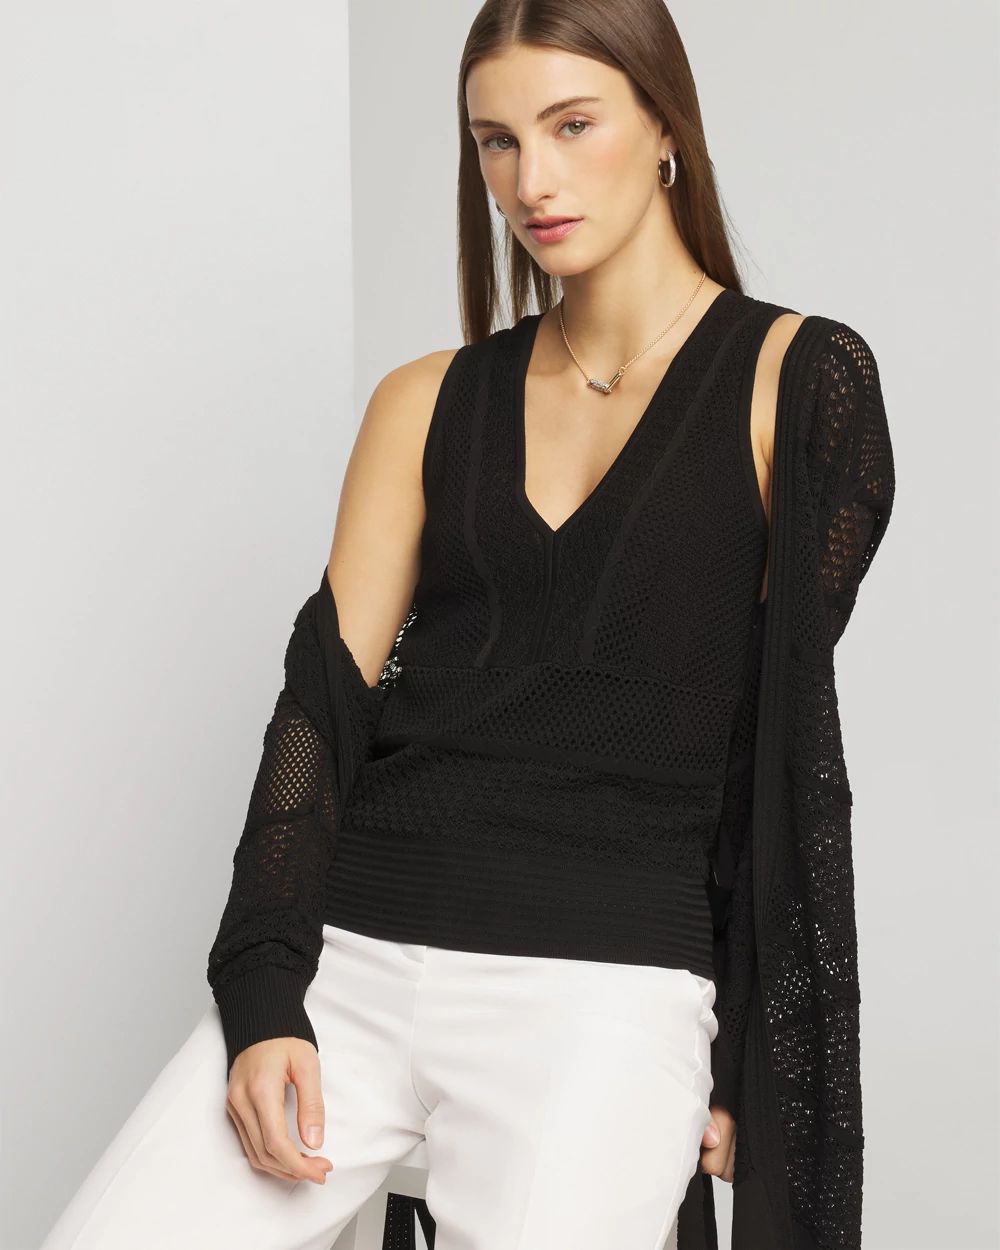 Pointelle V-Neck Sweater Tank click to view larger image.